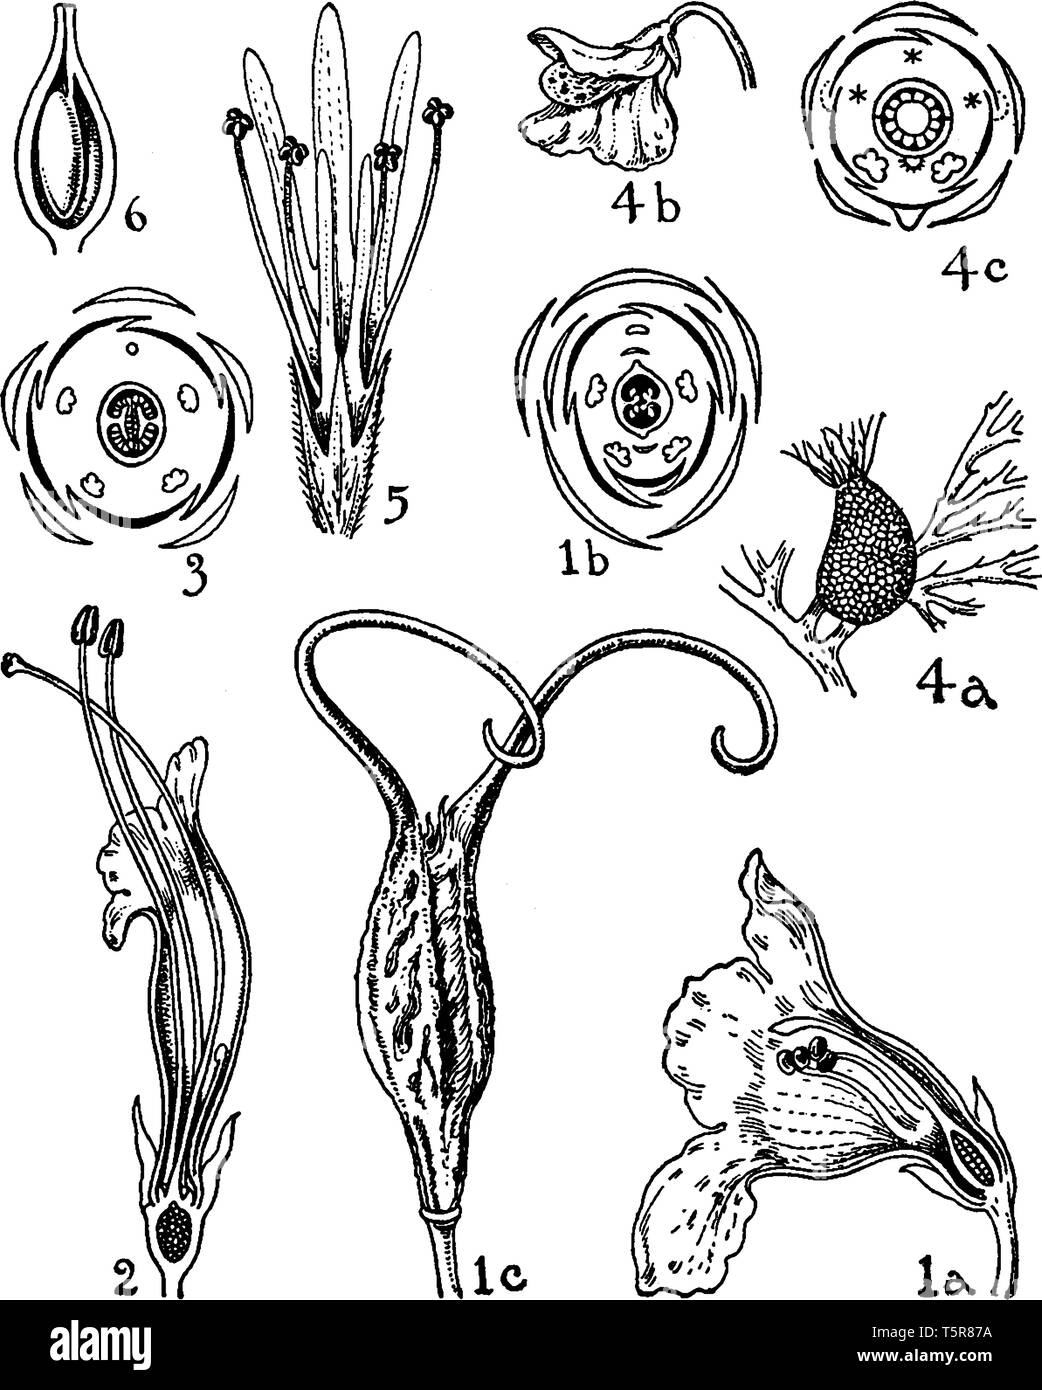 An illustration shows the flowers of (1) martynia, (2) gesneria, (3) achimenes, (4) utricularia, (5) globularia, and (6) cockburnia in martyniaceae, g Stock Vector